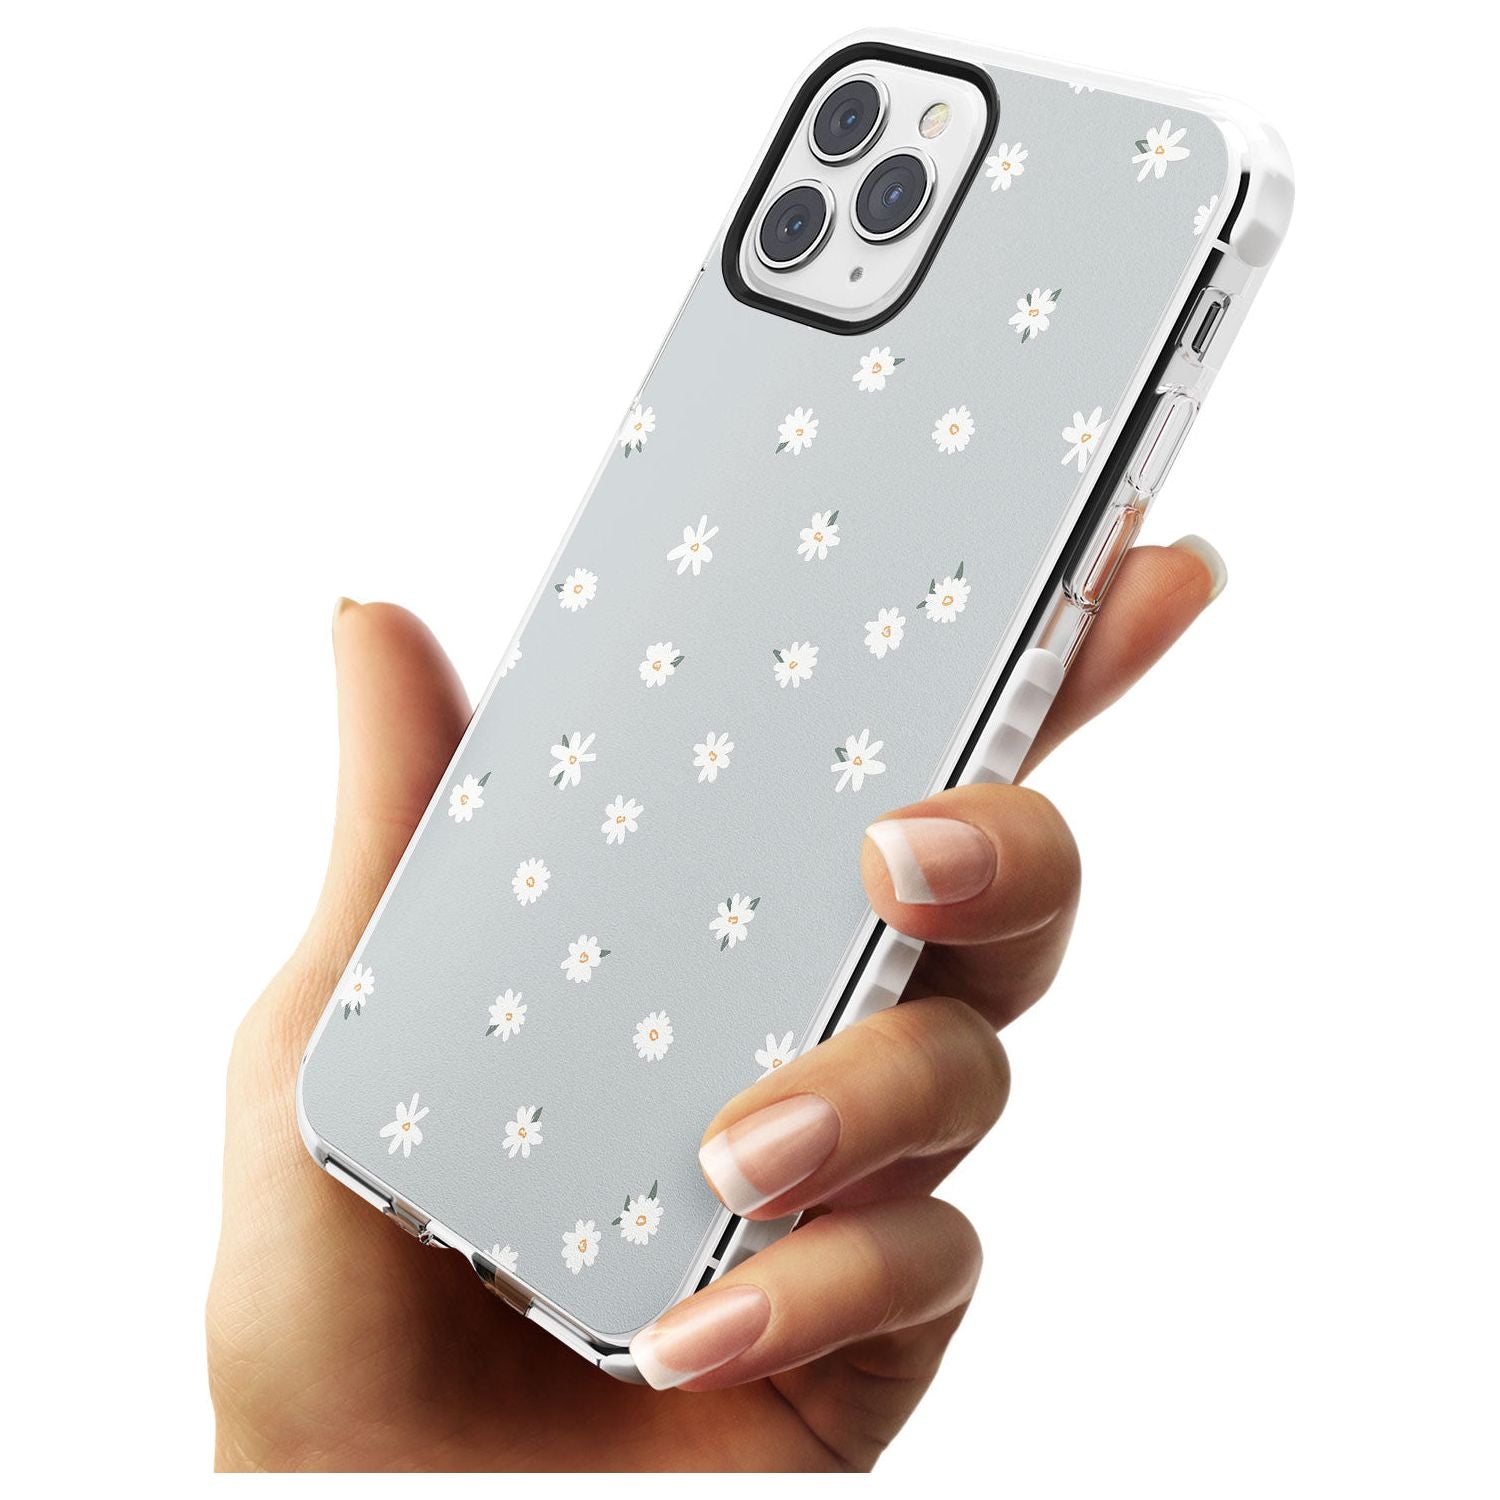 Painted Daises - Blue-Grey Cute Floral Design Slim TPU Phone Case for iPhone 11 Pro Max